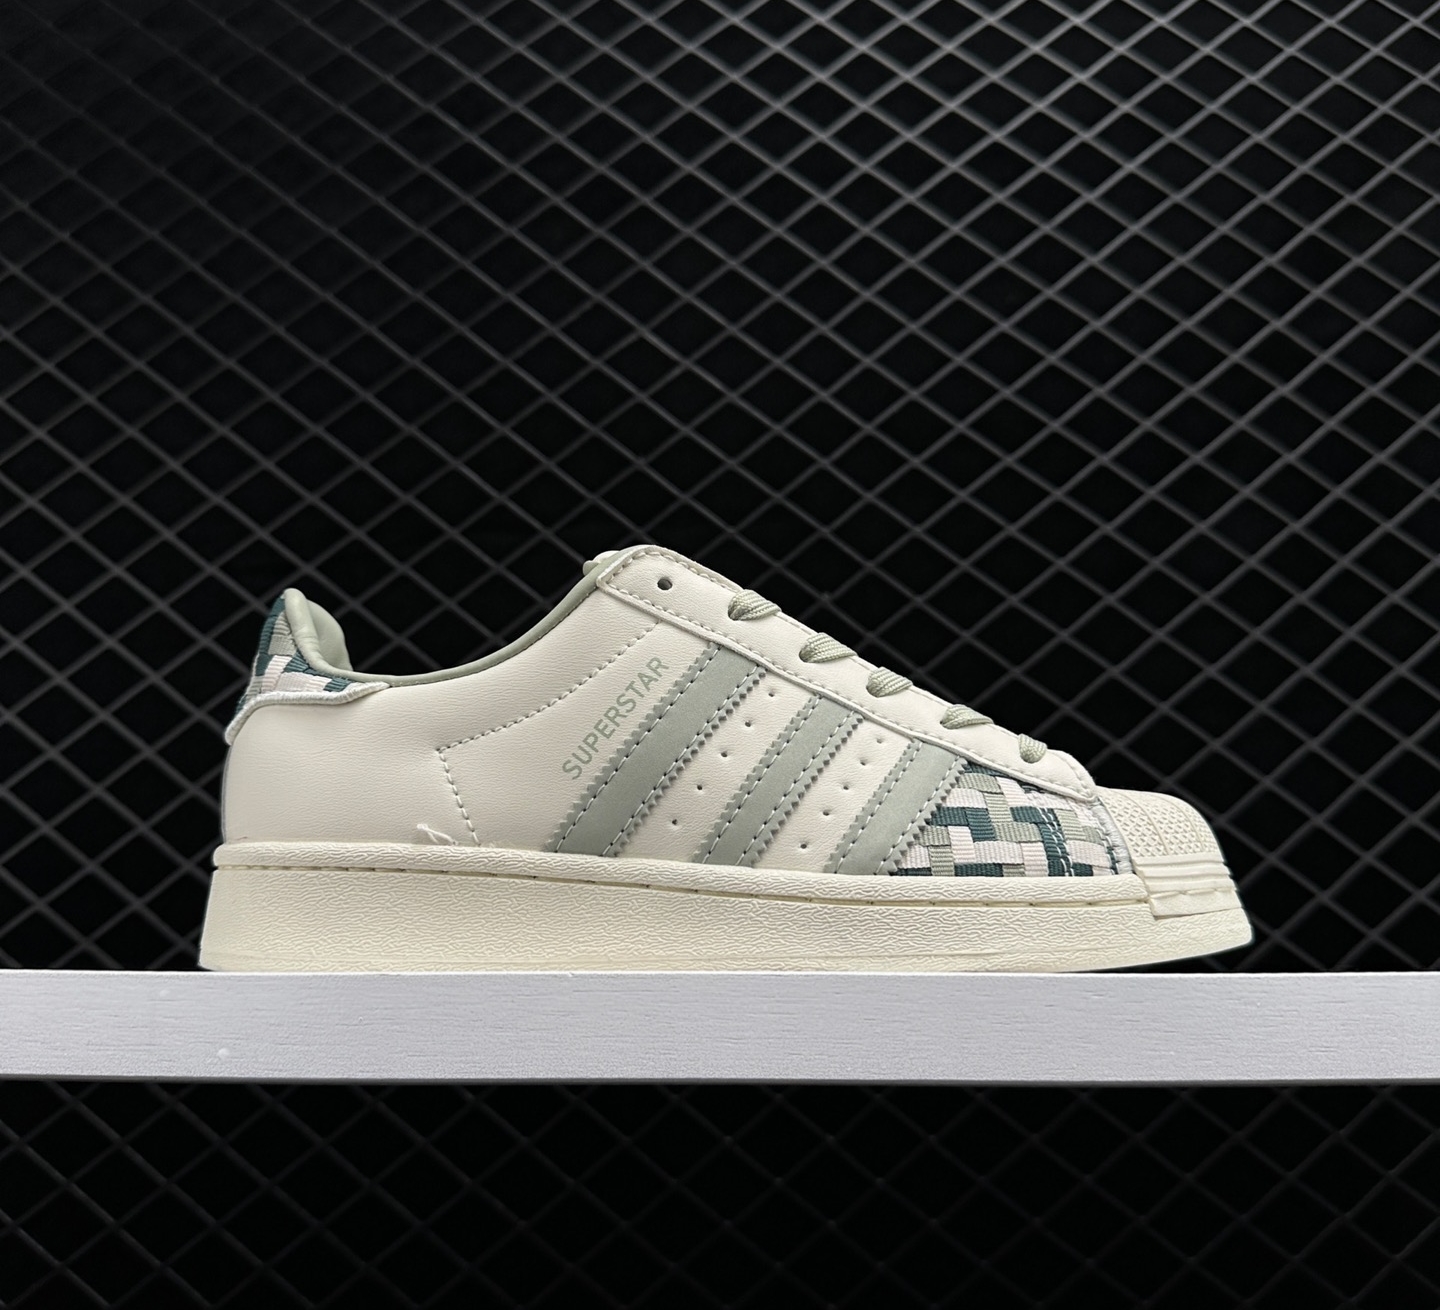 Adidas Originals Superstar White Green GY4156 - Stylish & Classic Sneakers